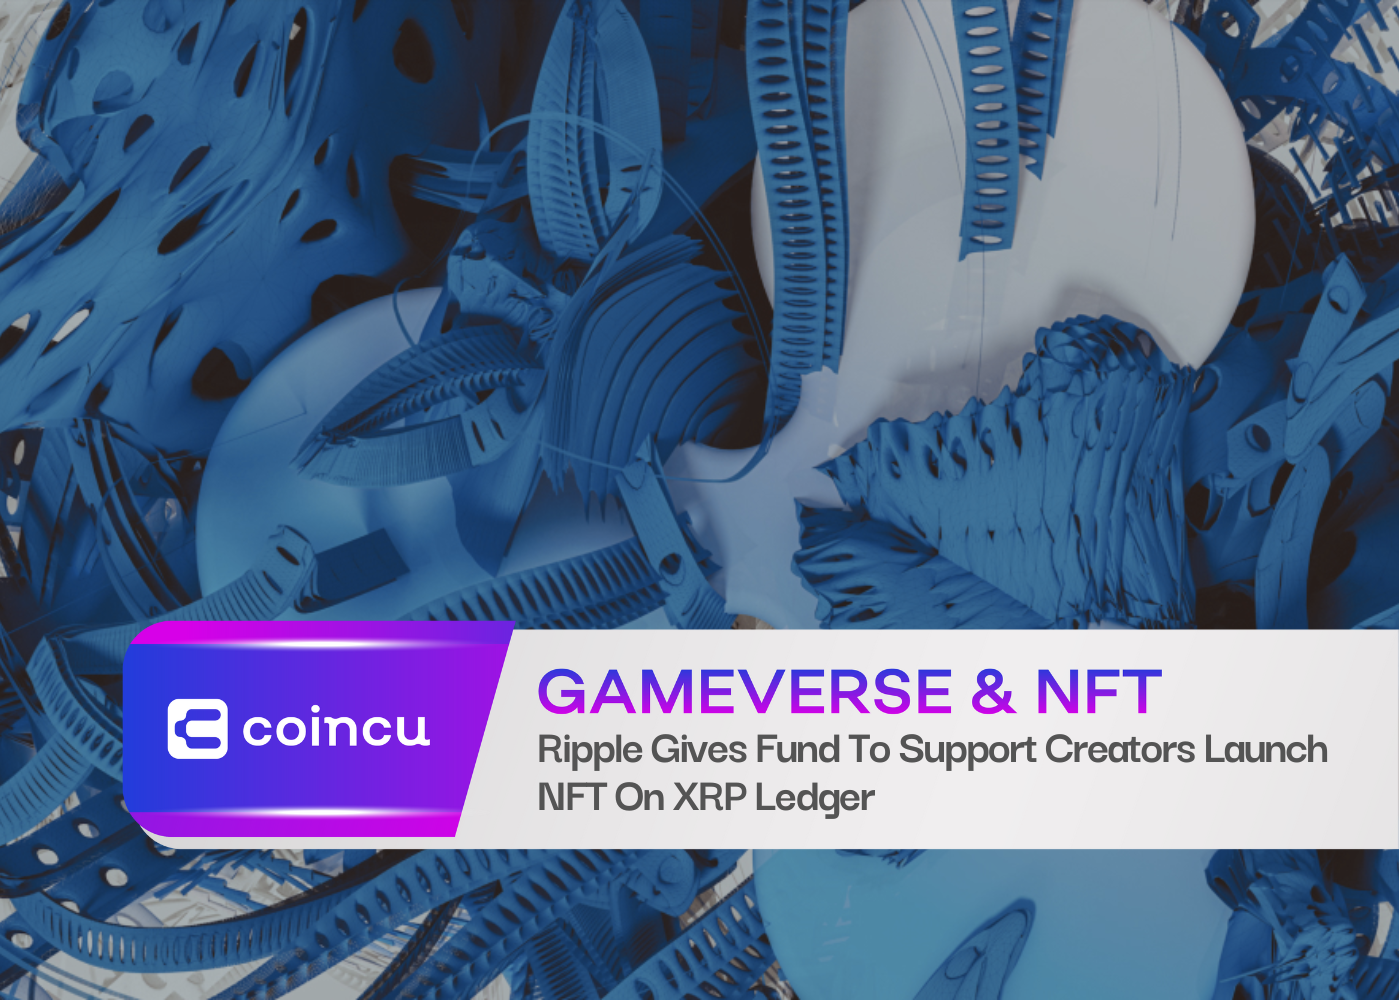 Ripple Gives Fund To Support Creators Launch NFT On XRP Ledger